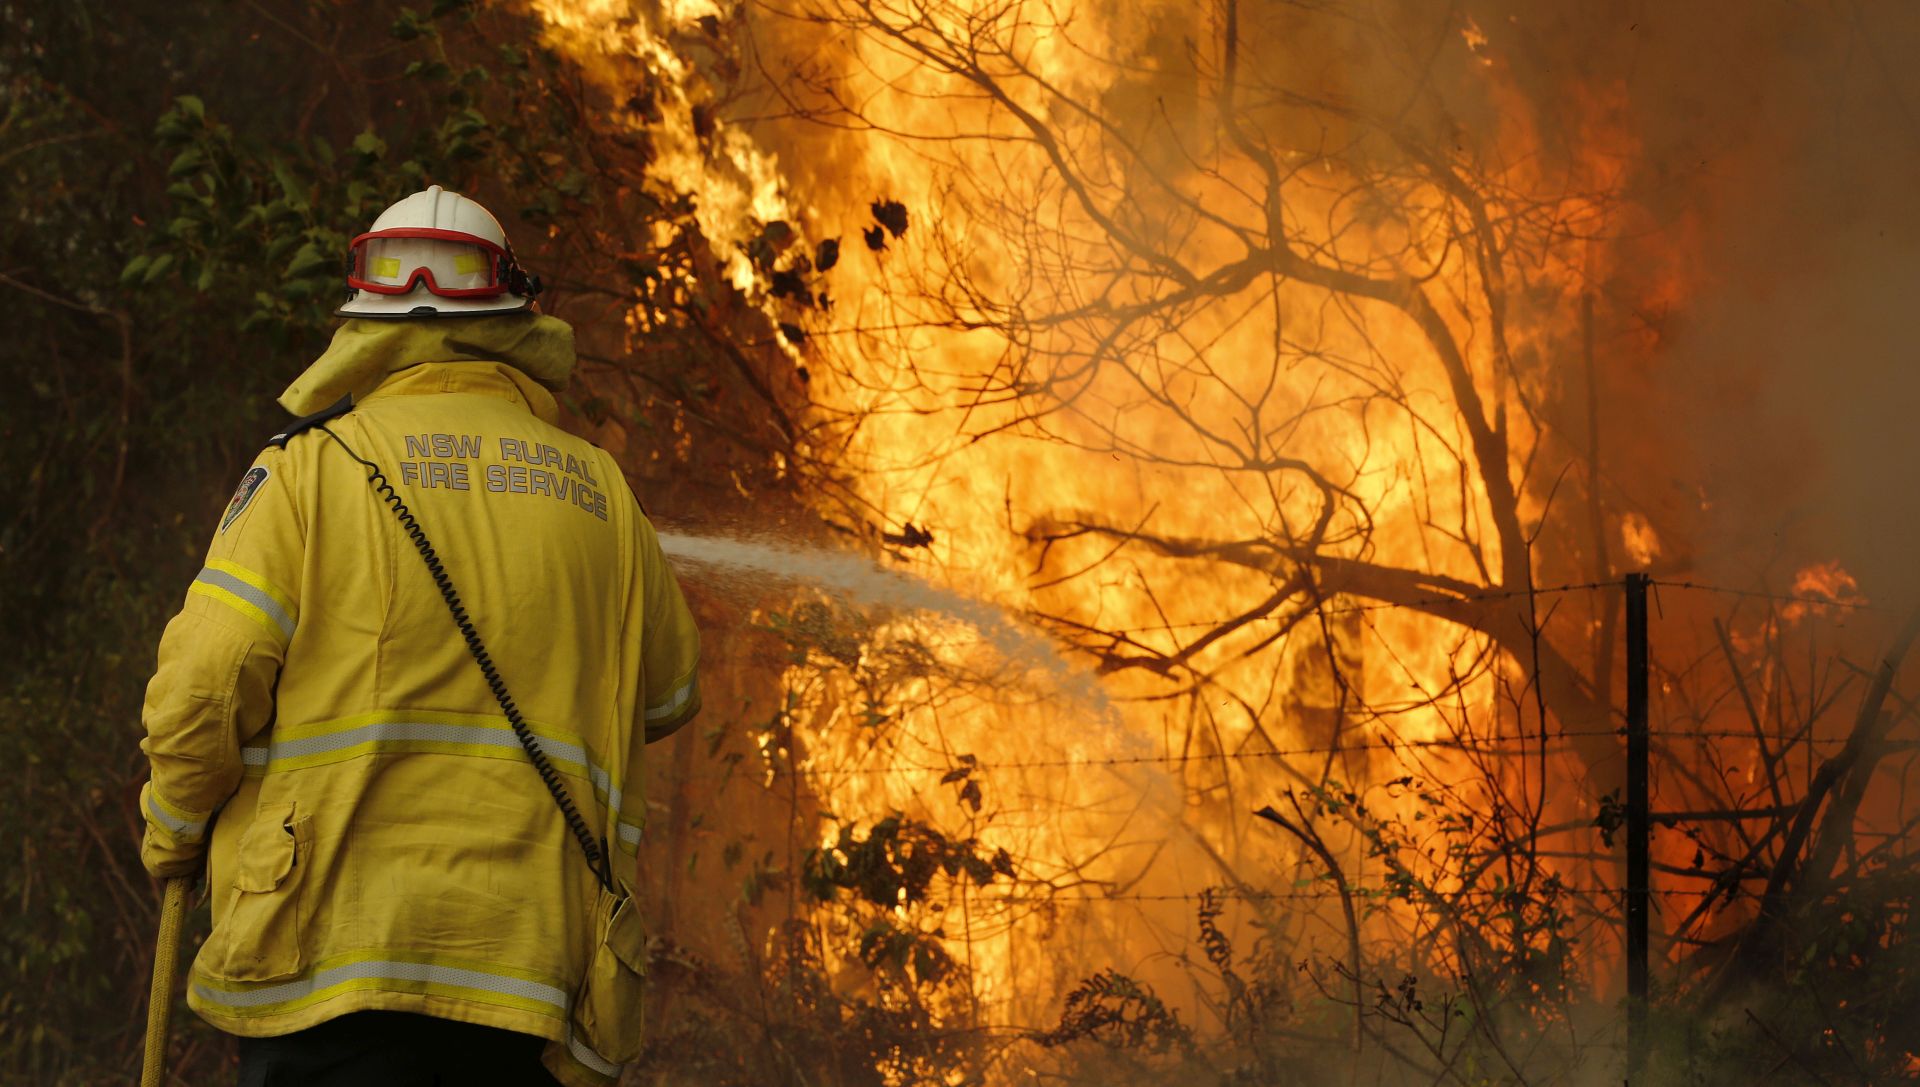 epa07989709 A firefighter works to contain a fire near Taree, New South Wales, Australia, 12 November 2019. At least 60 fires are burning across New South Wales, with a fire front of approximately 1,000 kilometers. According to media reports, 200 properties in New South Wales and Queensland have been destroyed since 08 November.  EPA/DARREN PATEMAN AUSTRALIA AND NEW ZEALAND OUT